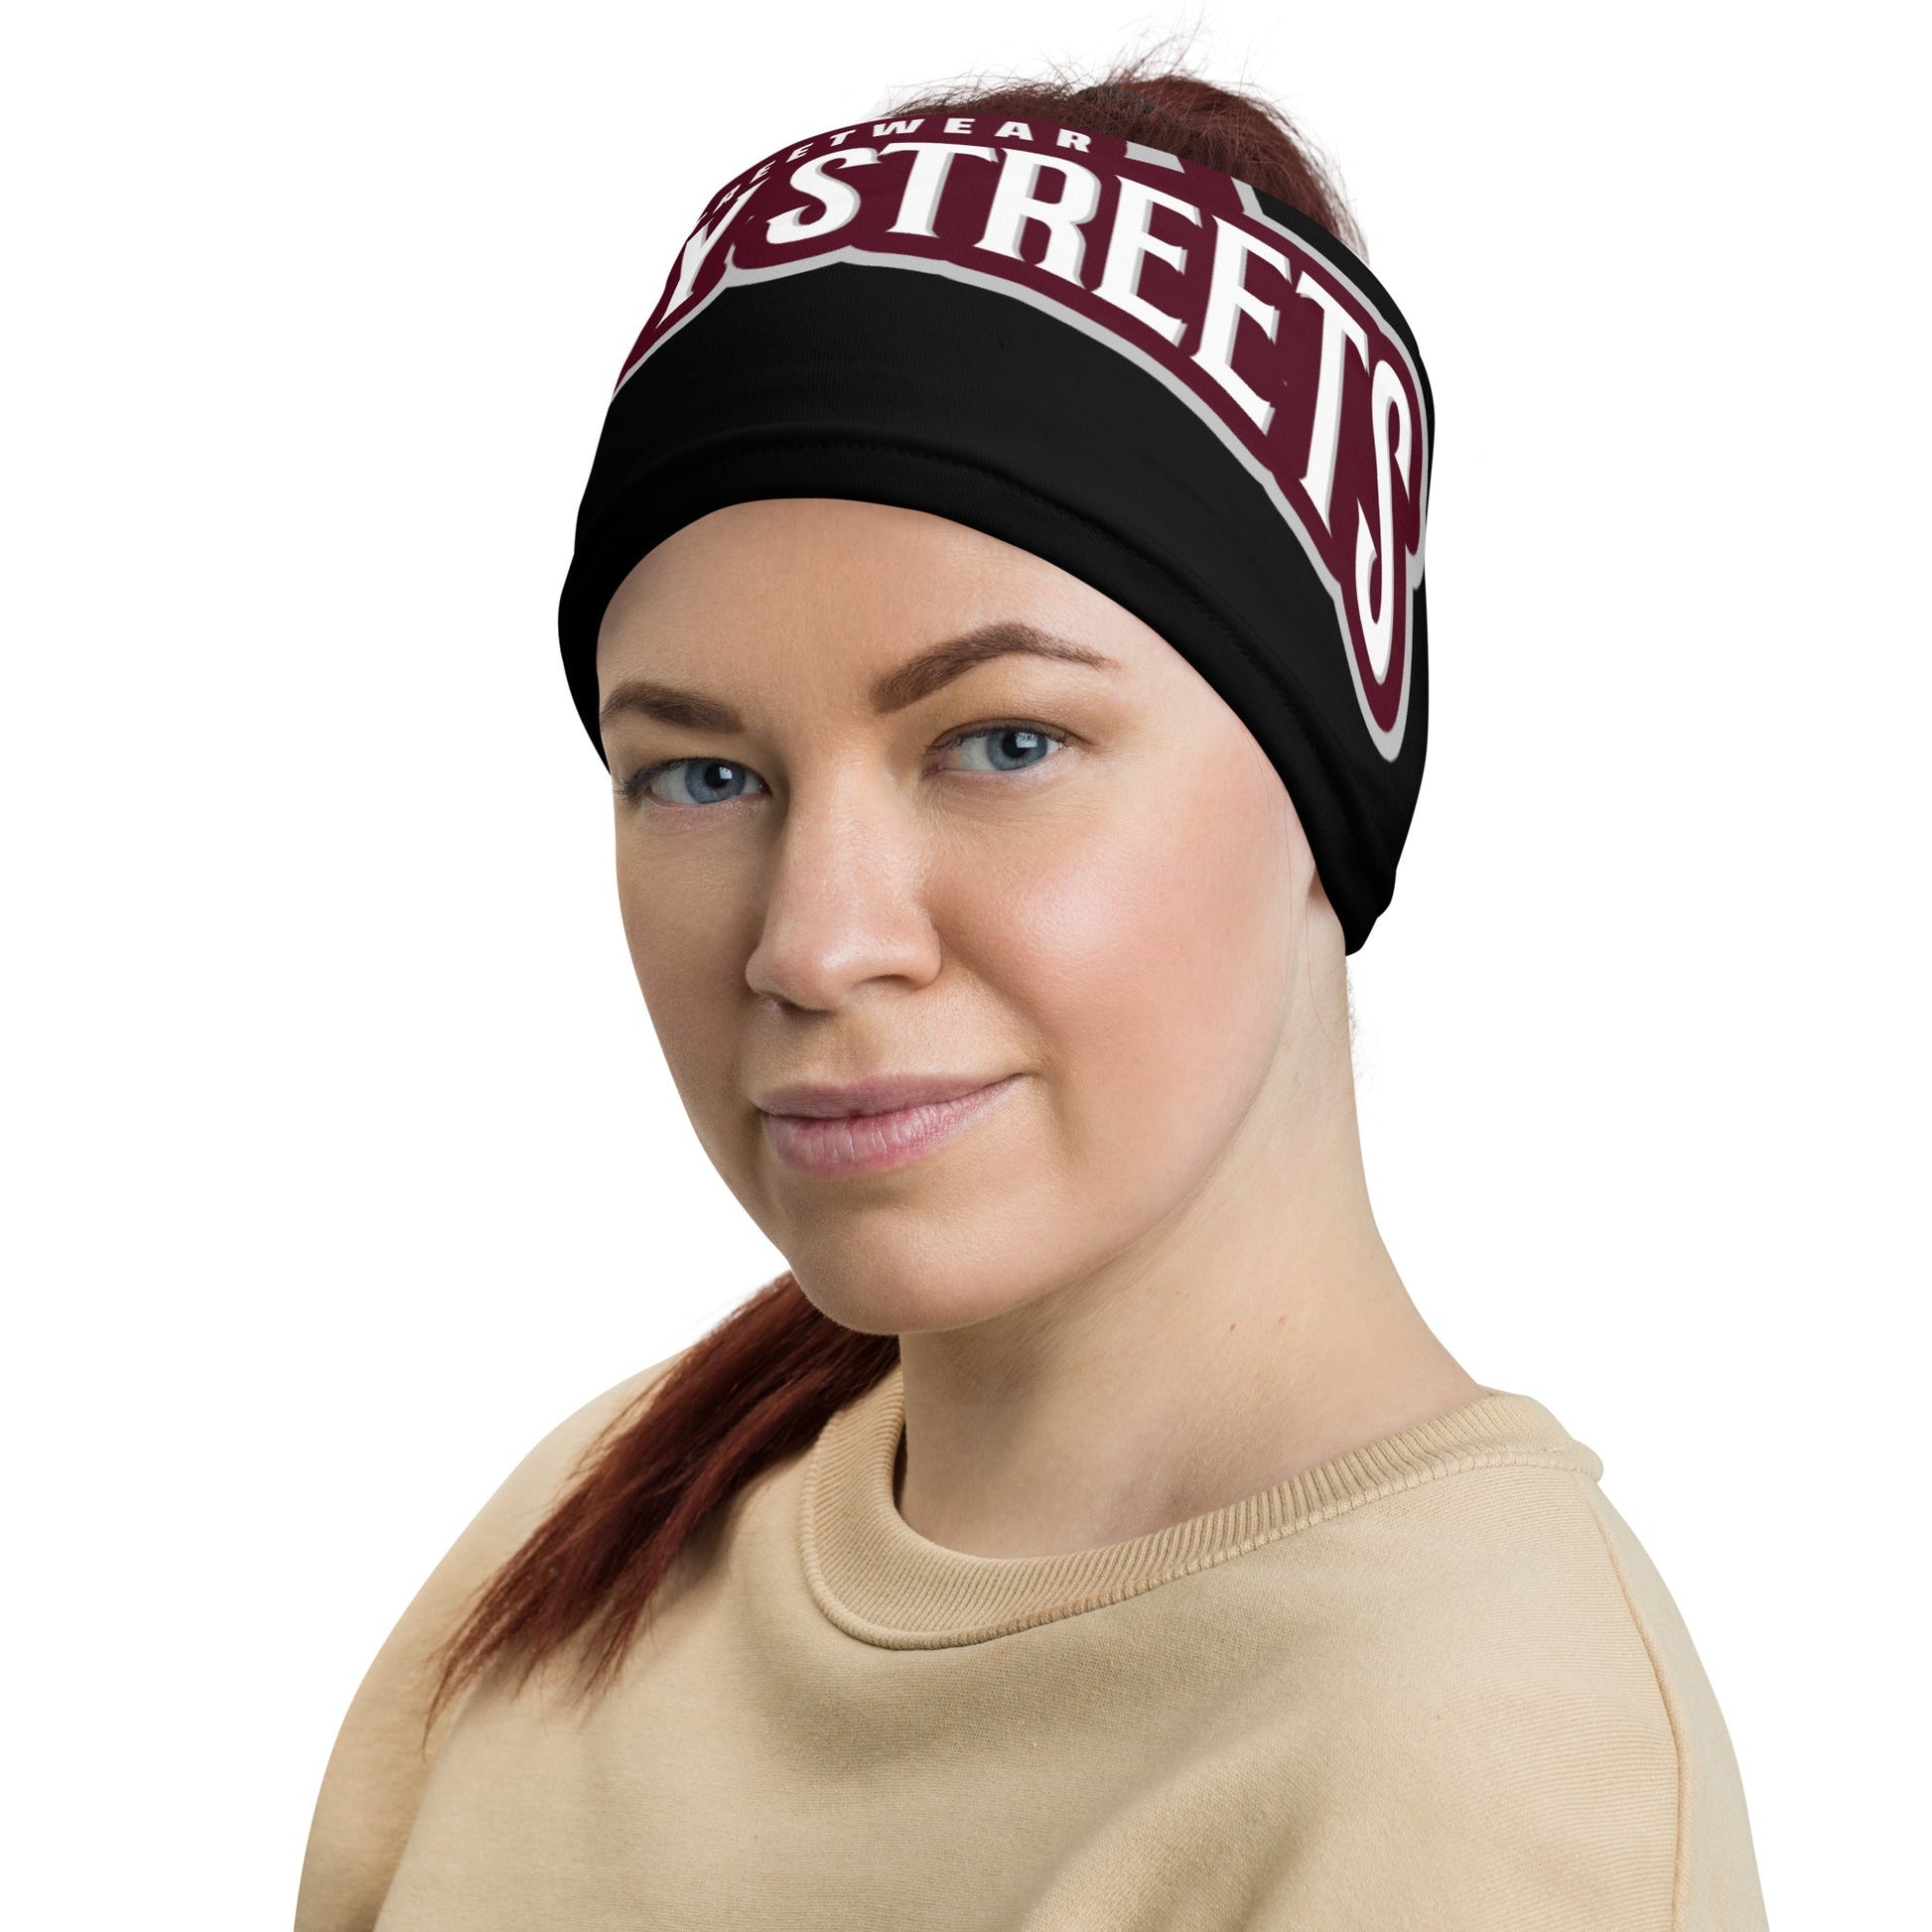 BLOODY STREETS Honor and Pride Streetwear Maske - BLOODY-STREETS.DE Streetwear Herren und Damen Hoodies, T-Shirts, Pullis